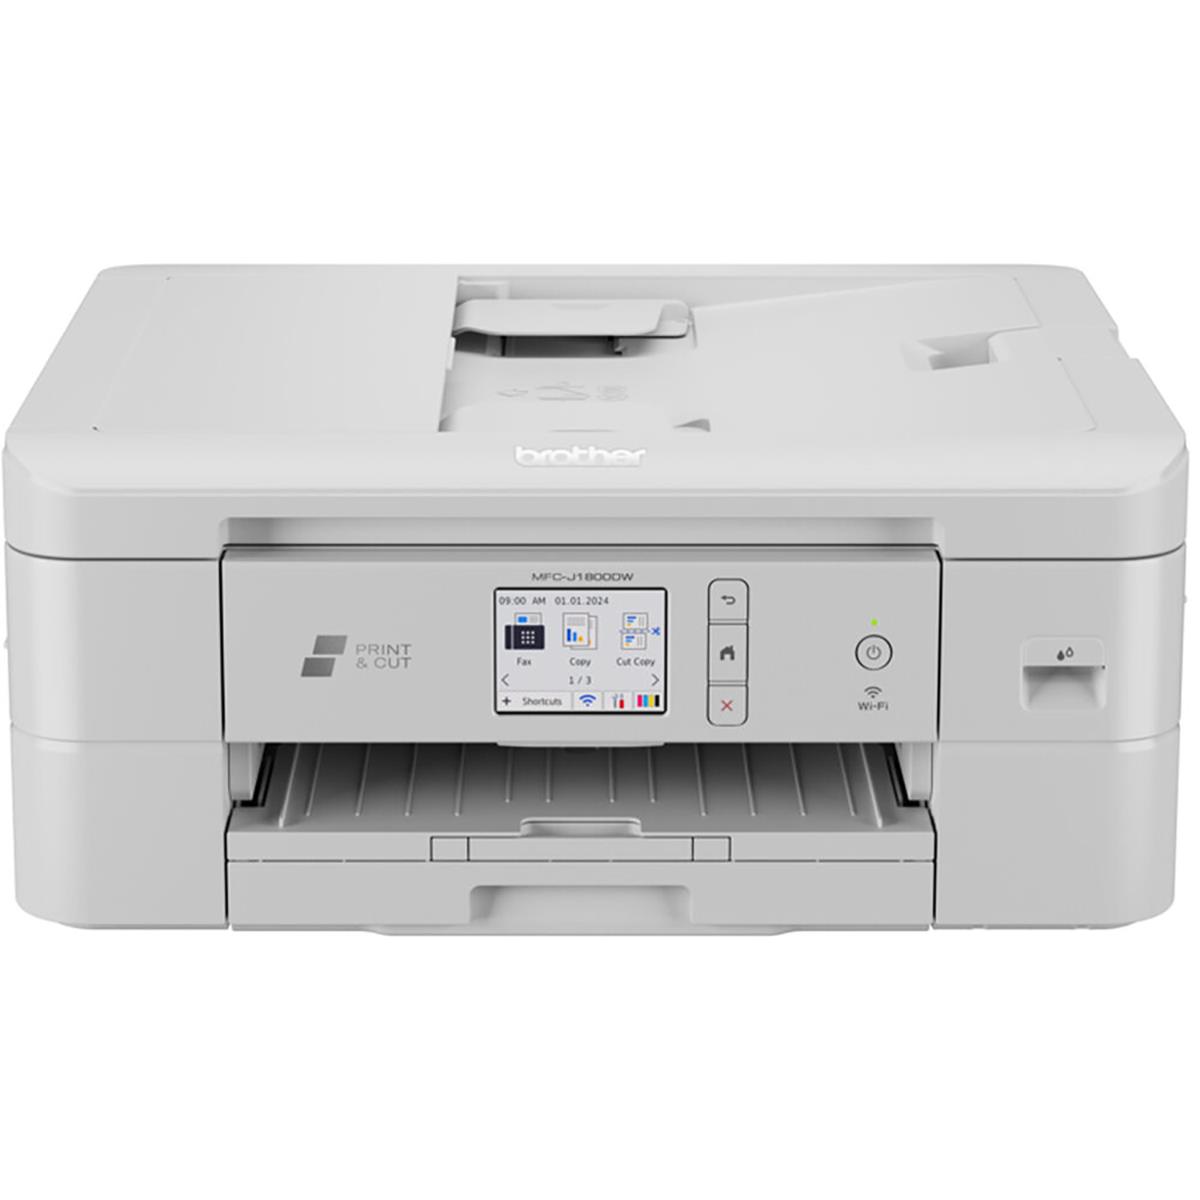 Image of Brother MFC-J1800DW Print &amp; Cut Wireless All-In-One Duplex Color Inkjet Printer